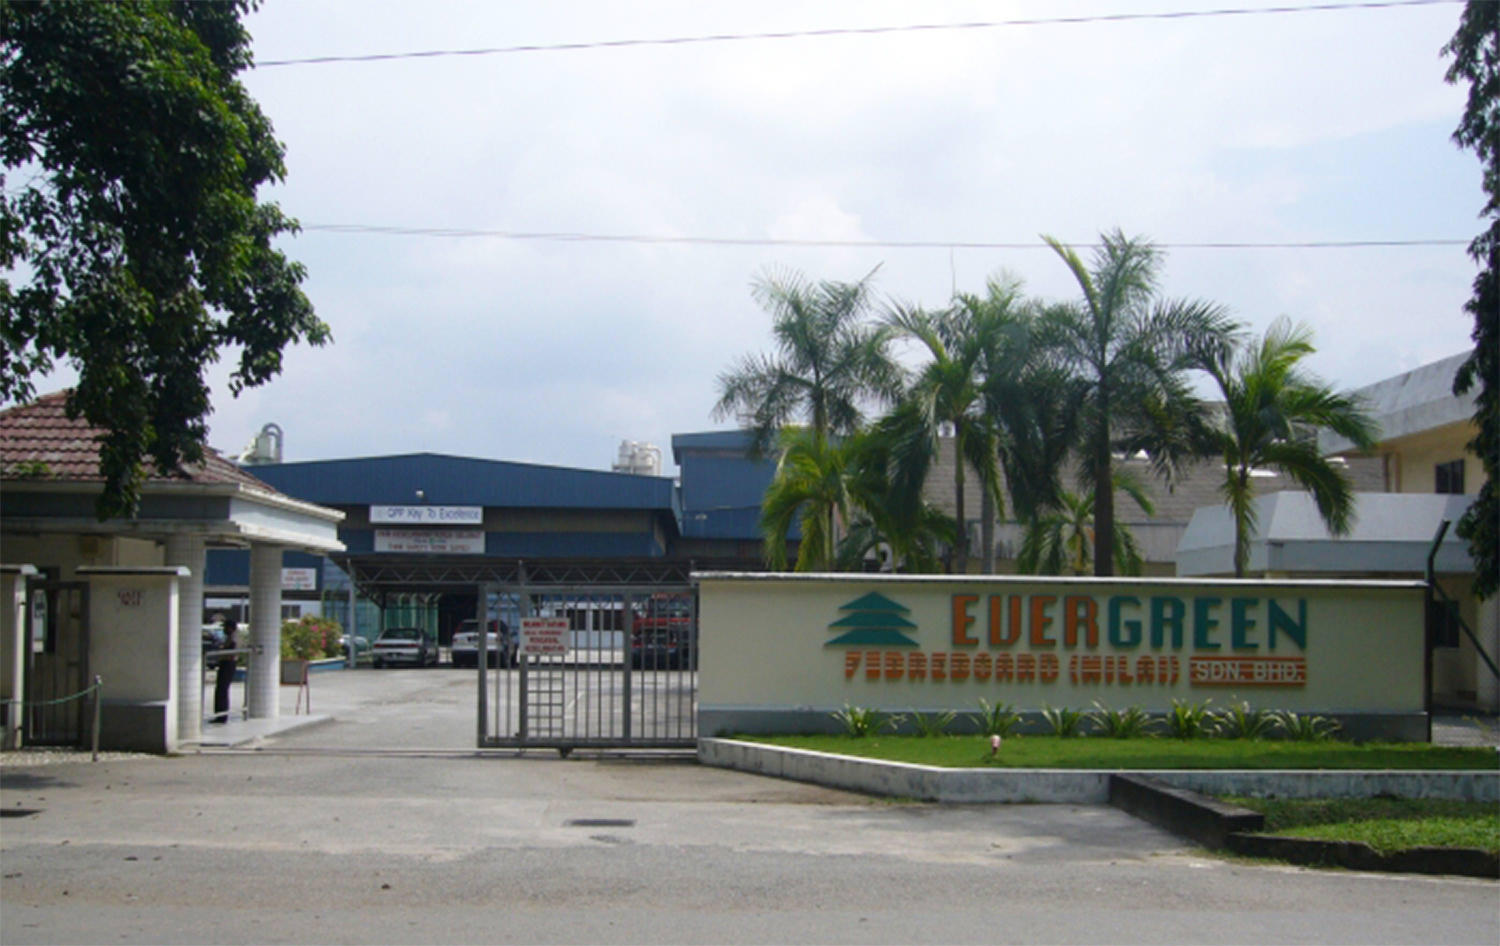 Evergreen's Nilai plant has an annual production capacity of 250,000 cubic metres.